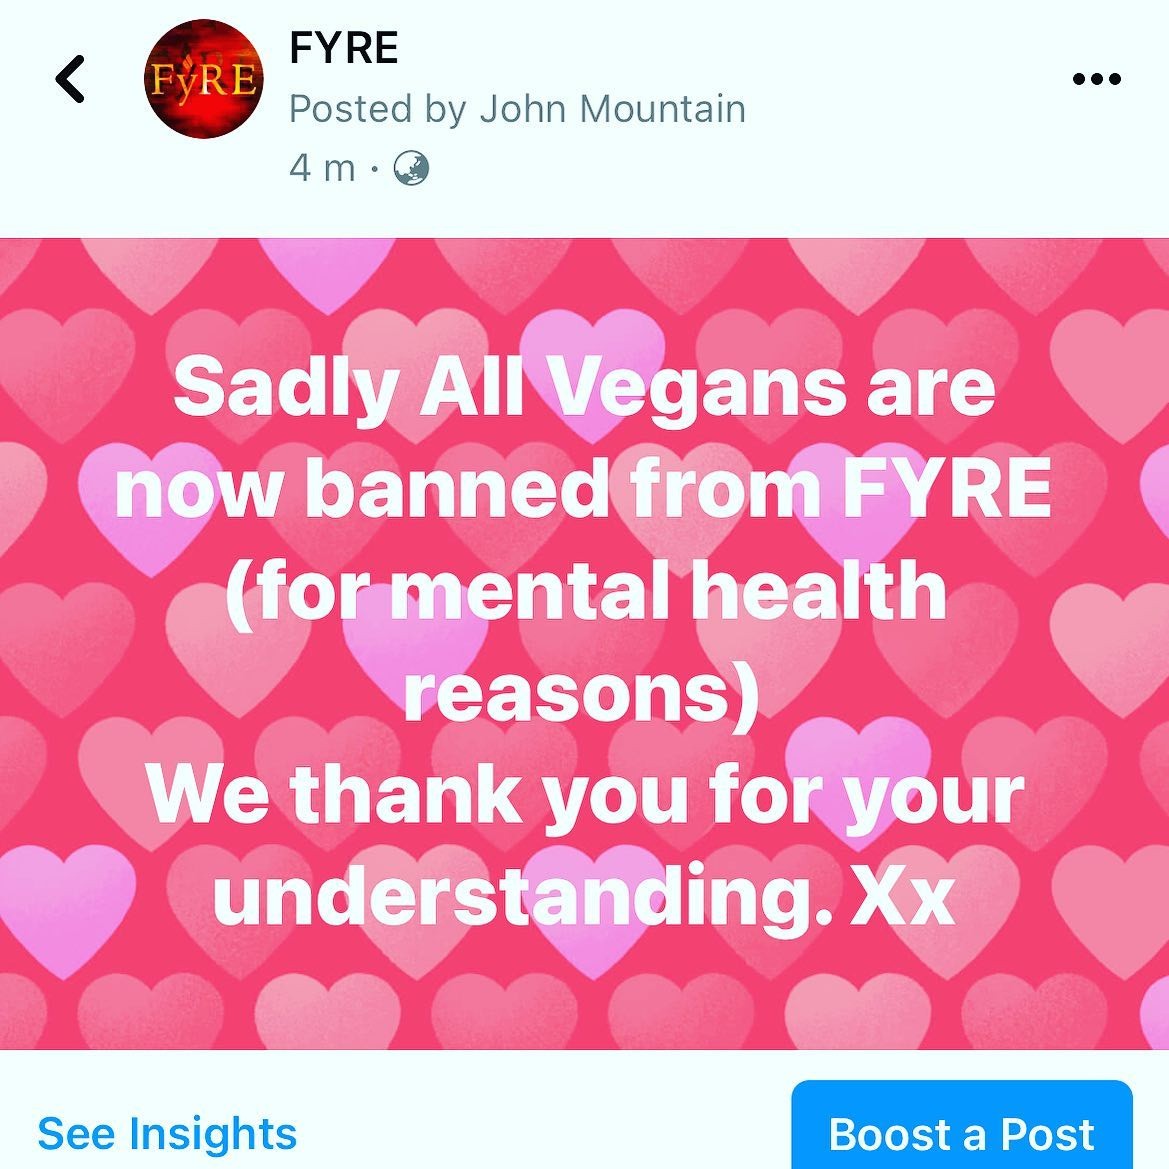 May be an image of text that says "FYRE FYRE Posted by John Mountain 4m・ m Sadly All Vegans are now banned from FYRE (for mental health reasons) We thank you for your understanding. Xx See Insights Boost a Post"